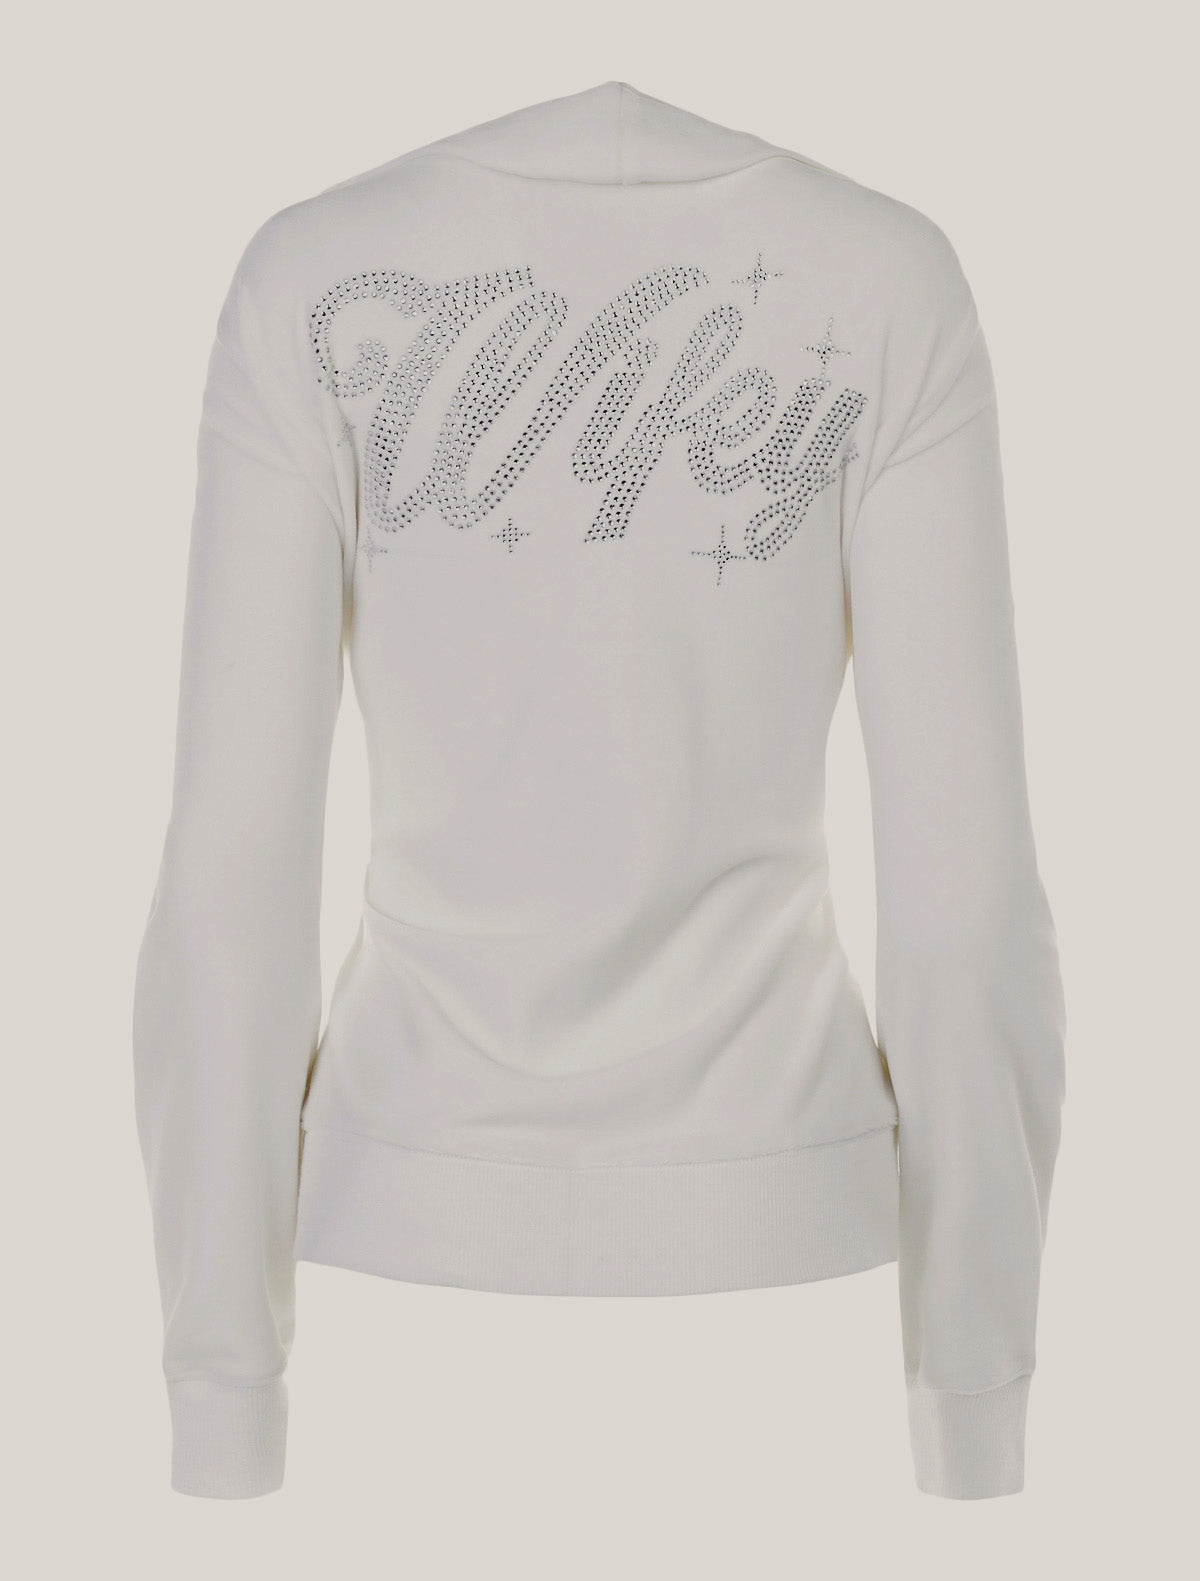 Wifey for Lifey Hoodie